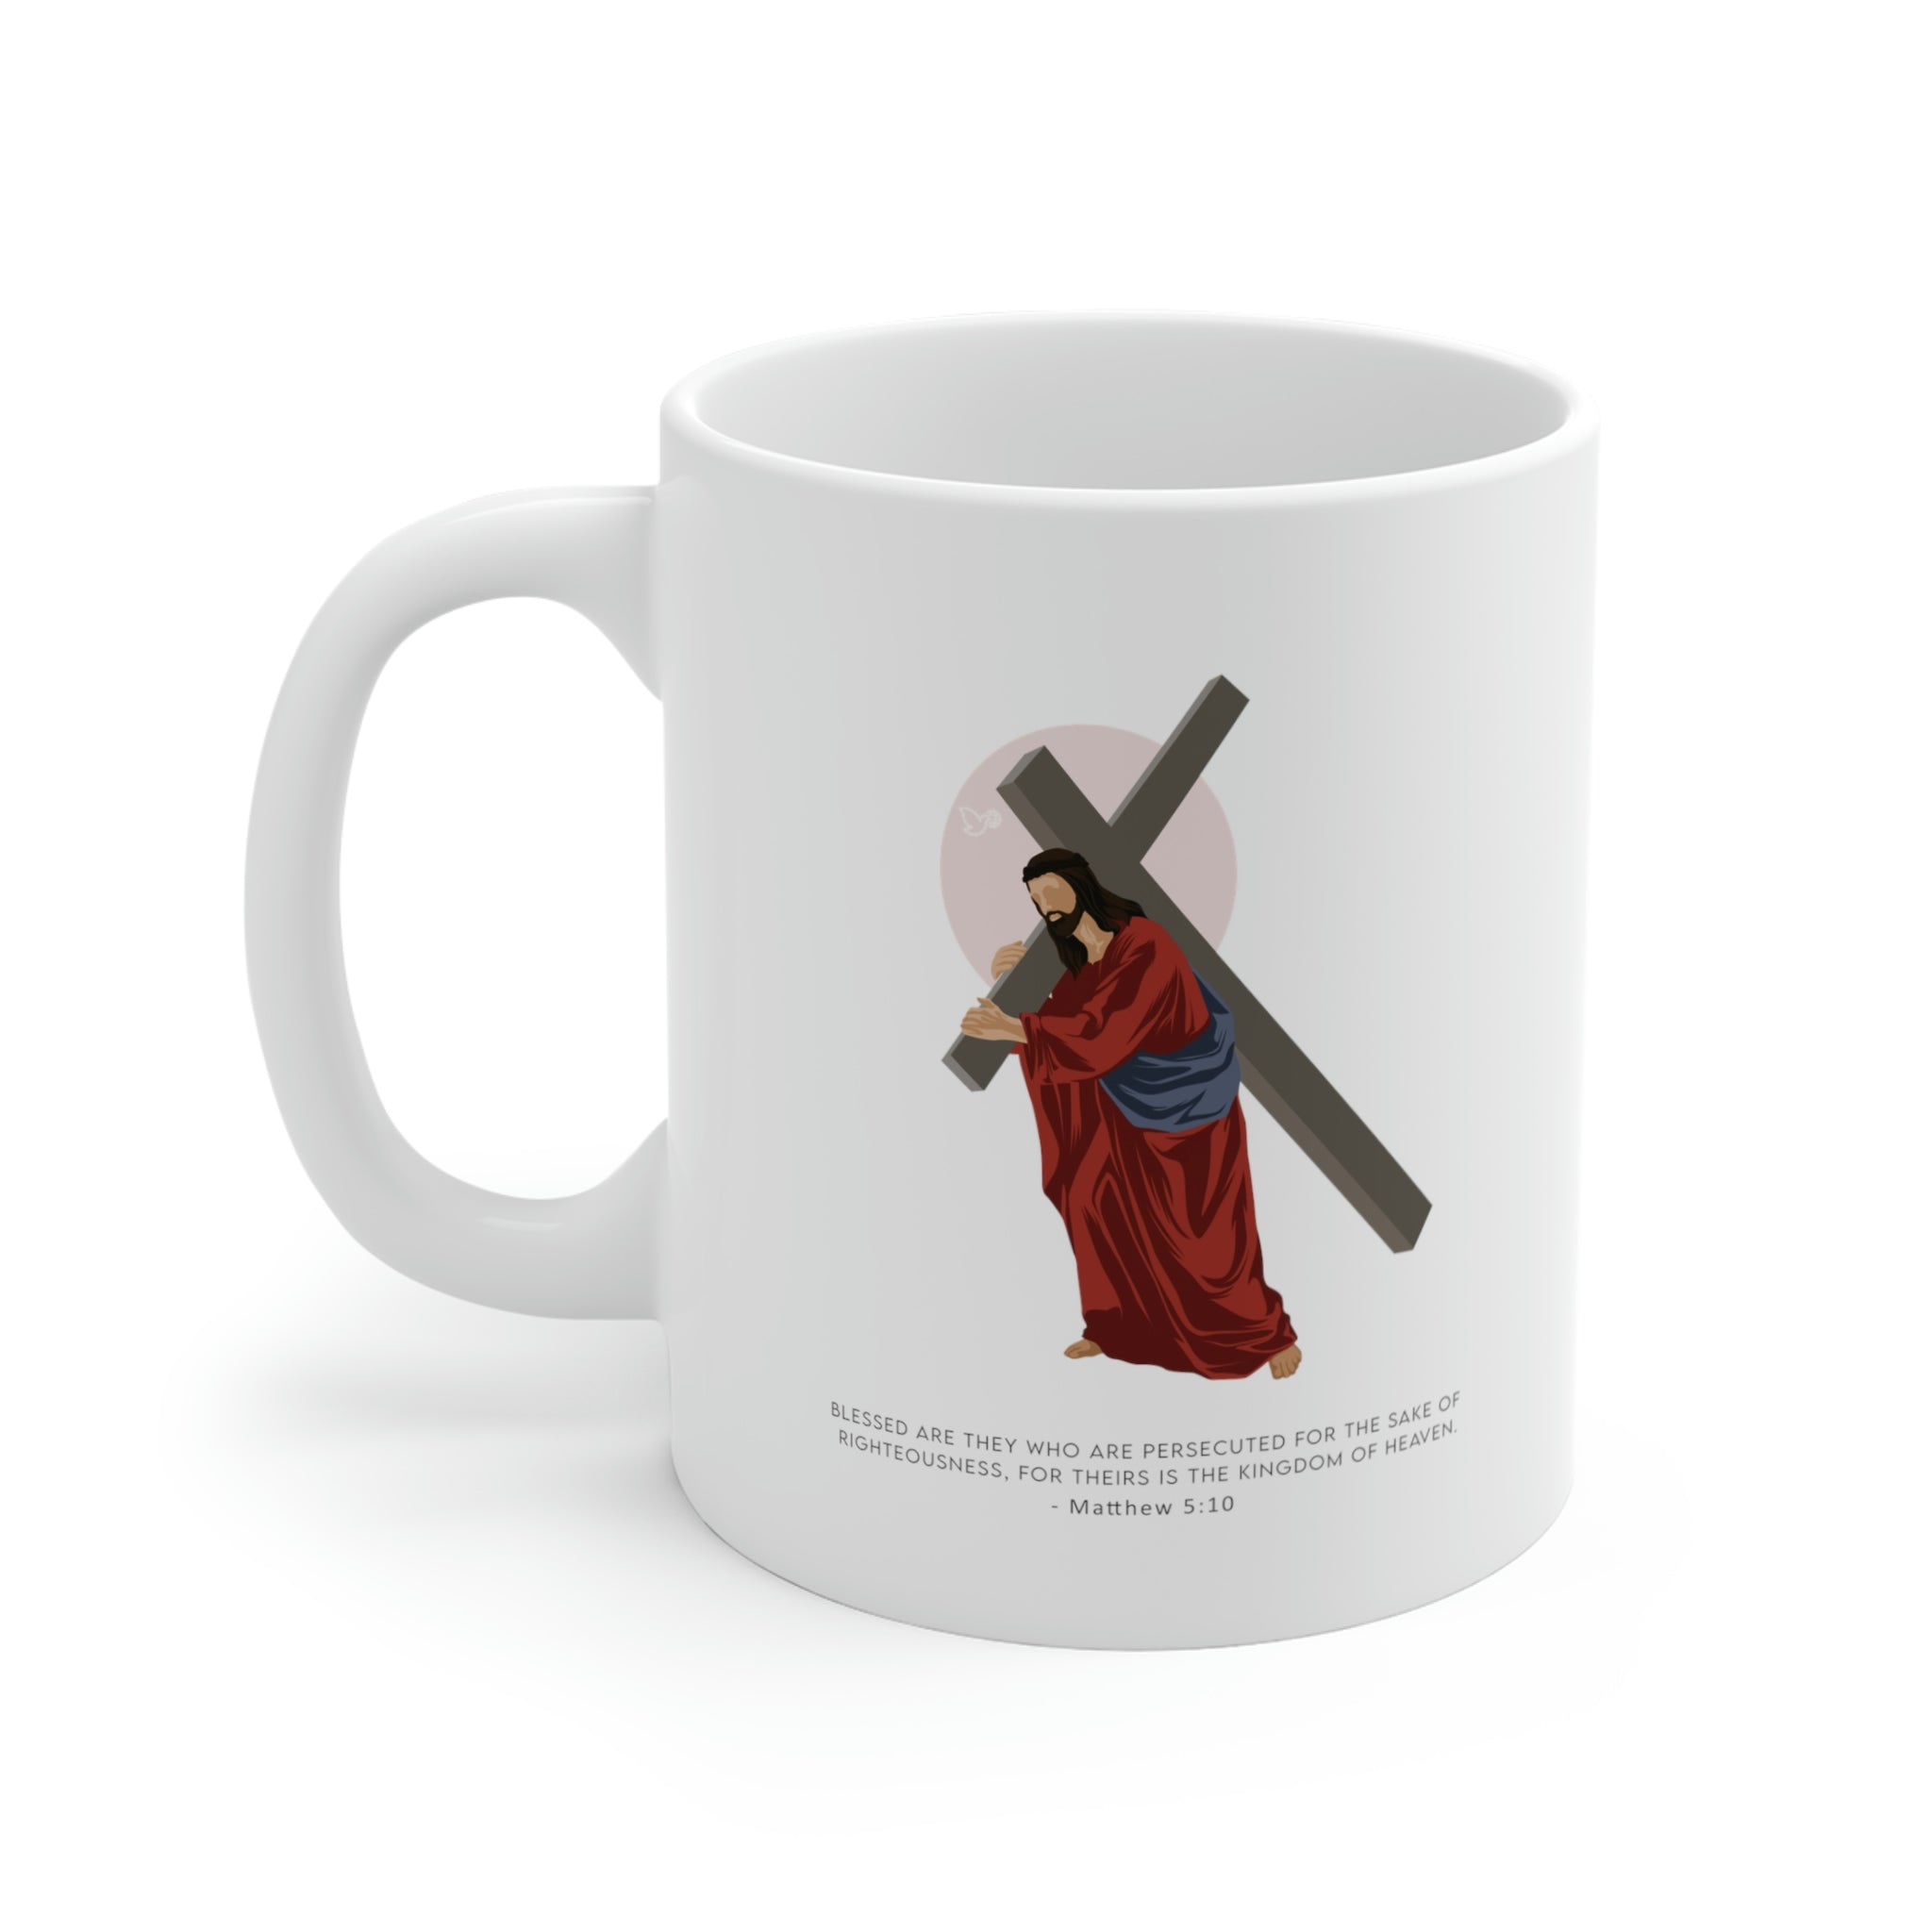 Jesus Christ - Blessed are the persecuted Coffee Mug